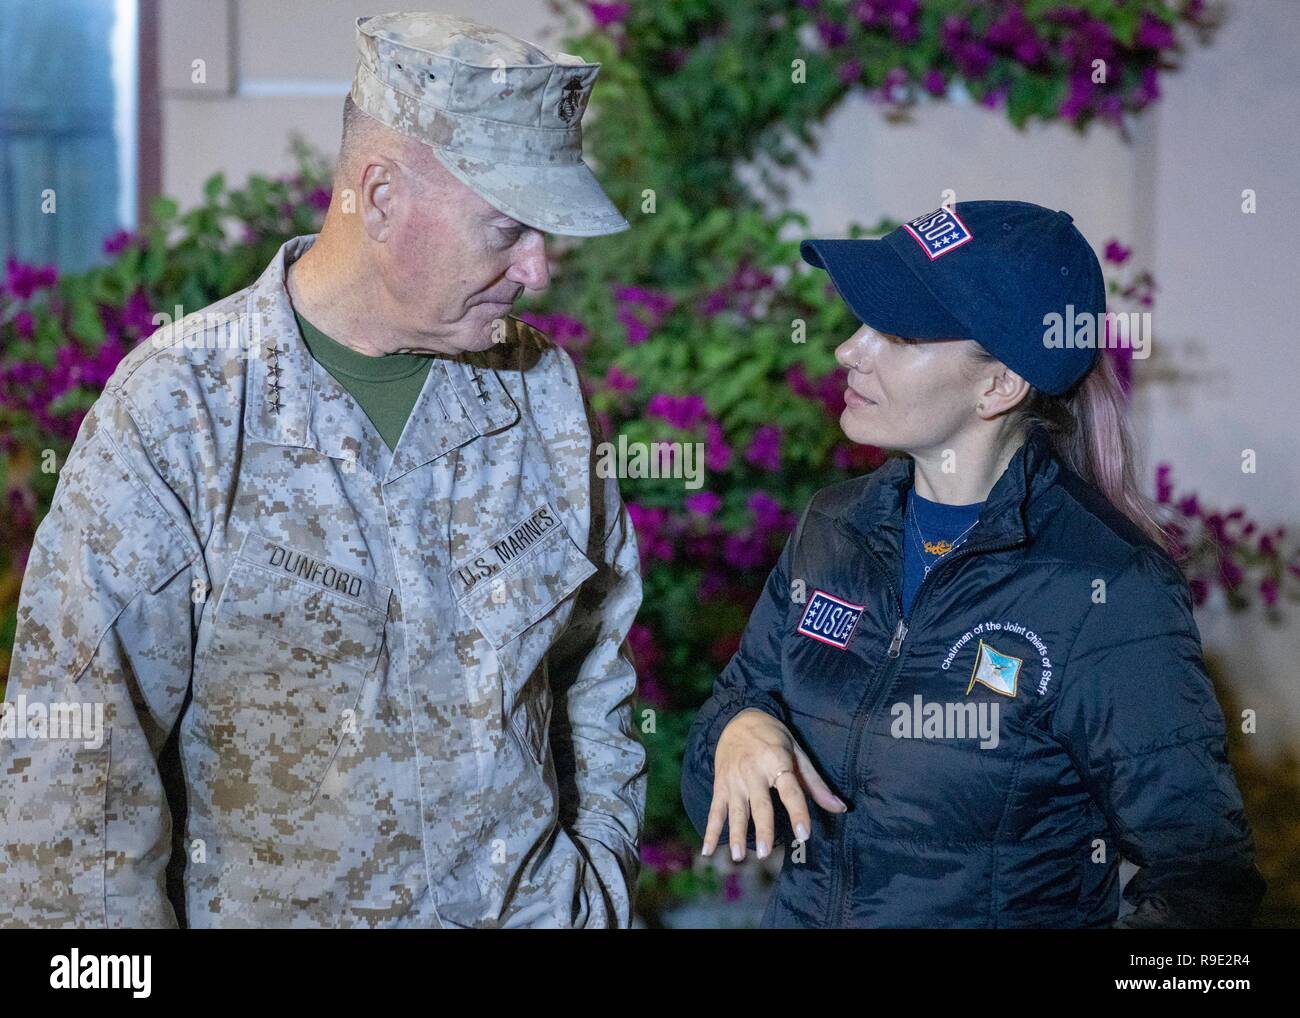 Manama, Bahrain. 21st Dec, 2018. Comedian Jessiemae Peluso chats with Chairman of the Joint Chiefs Gen. Joseph Dunford during the Joint Chiefs USO Christmas Show for deployed service members at Naval Support Activity Bahrain December 22, 2018 in Manama, Bahrain. This year’s entertainers include actors Milo Ventimiglia, Wilmer Valderrama, DJ J Dayz, Fittest Man on Earth Matt Fraser, 3-time Olympic Gold Medalist Shaun White, Country Music Singer Kellie Pickler, and comedian Jessiemae Peluso. Credit: Planetpix/Alamy Live News Stock Photo